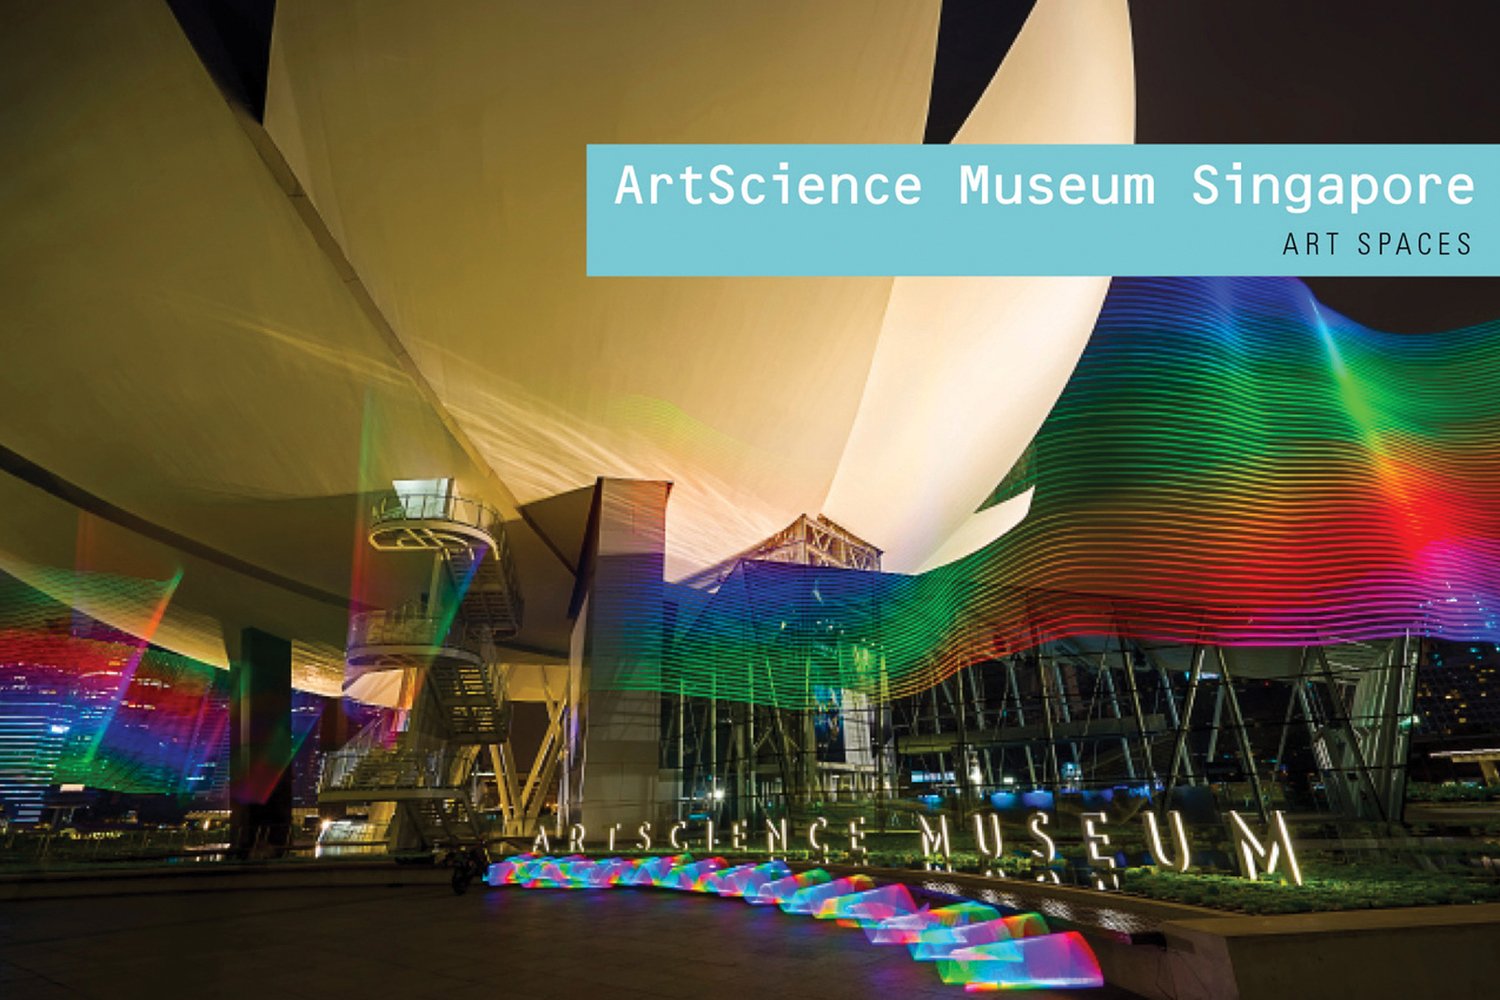 ArtScience Museum Singapore with wavy rainbow lights across cover, ArtScience Museum Singapore ART SPACES in white and black font on pale blue banner to upper right.